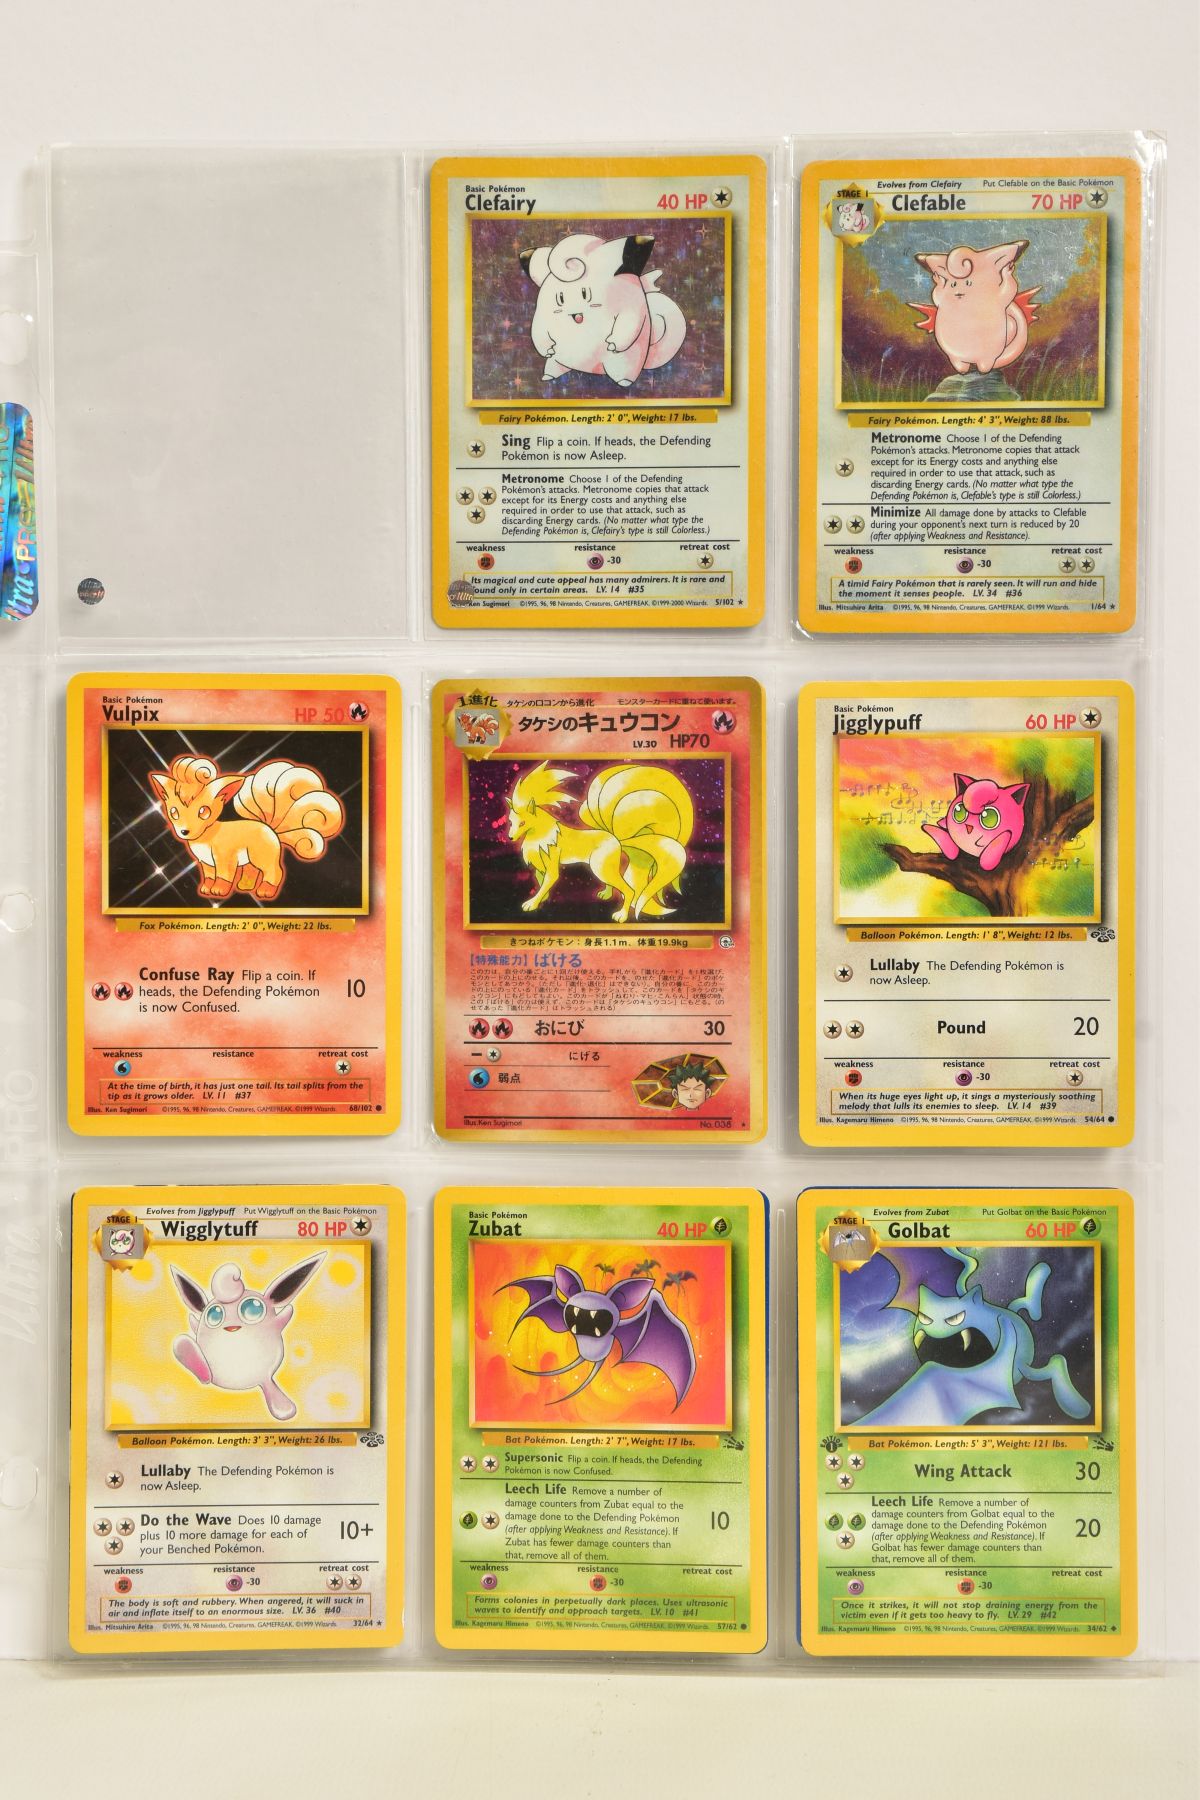 A QUANTITY OF POKEMON TCG CARDS, cards are assorted from Base Set, Base Set 2, Jungle, Fossil, - Image 10 of 46